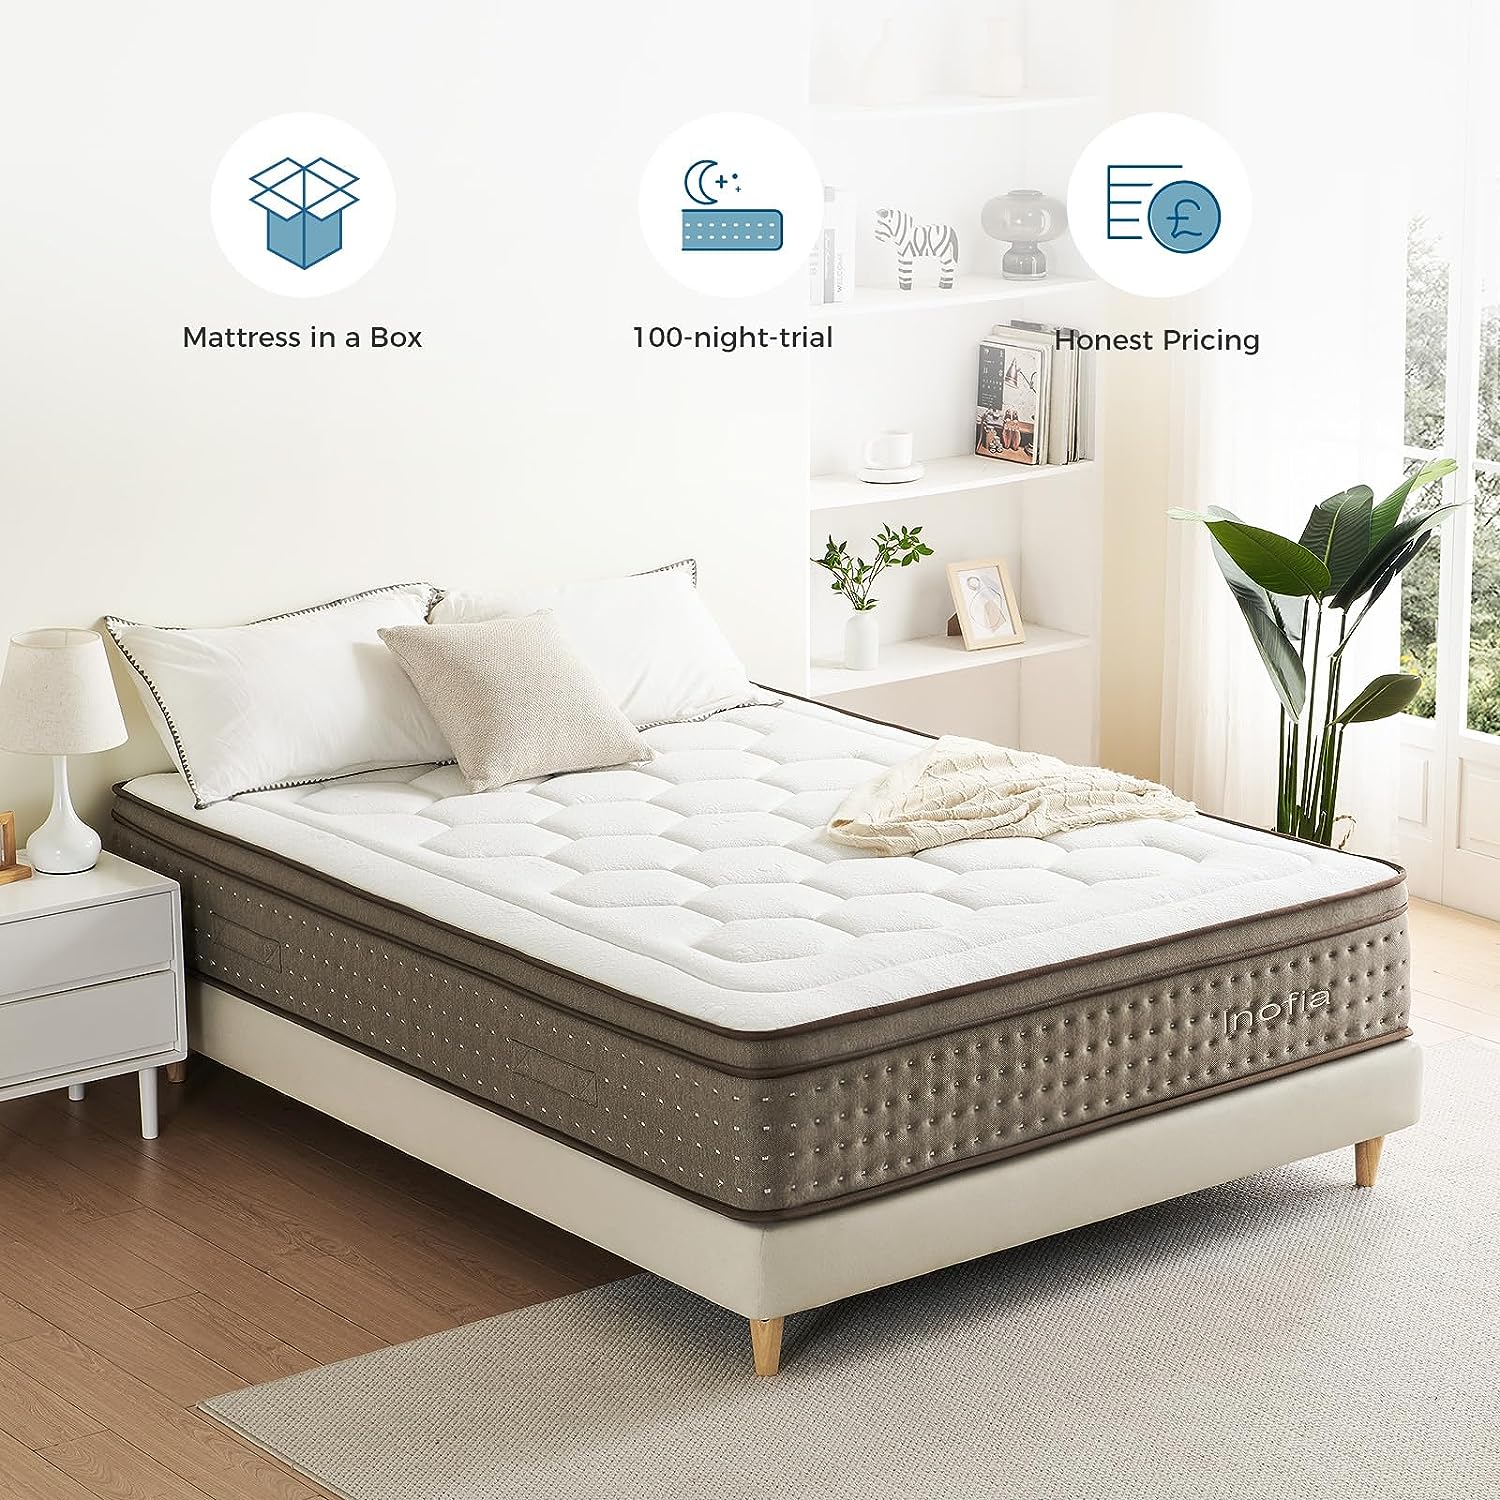 Inofia 12 Inch Cloud-Lux Memory Foam Mattress with Pocket Sprung Medium Firm with Tencel Fabric Fire Resistant Barrier Pressure Relieving OEKO-TEX Certified